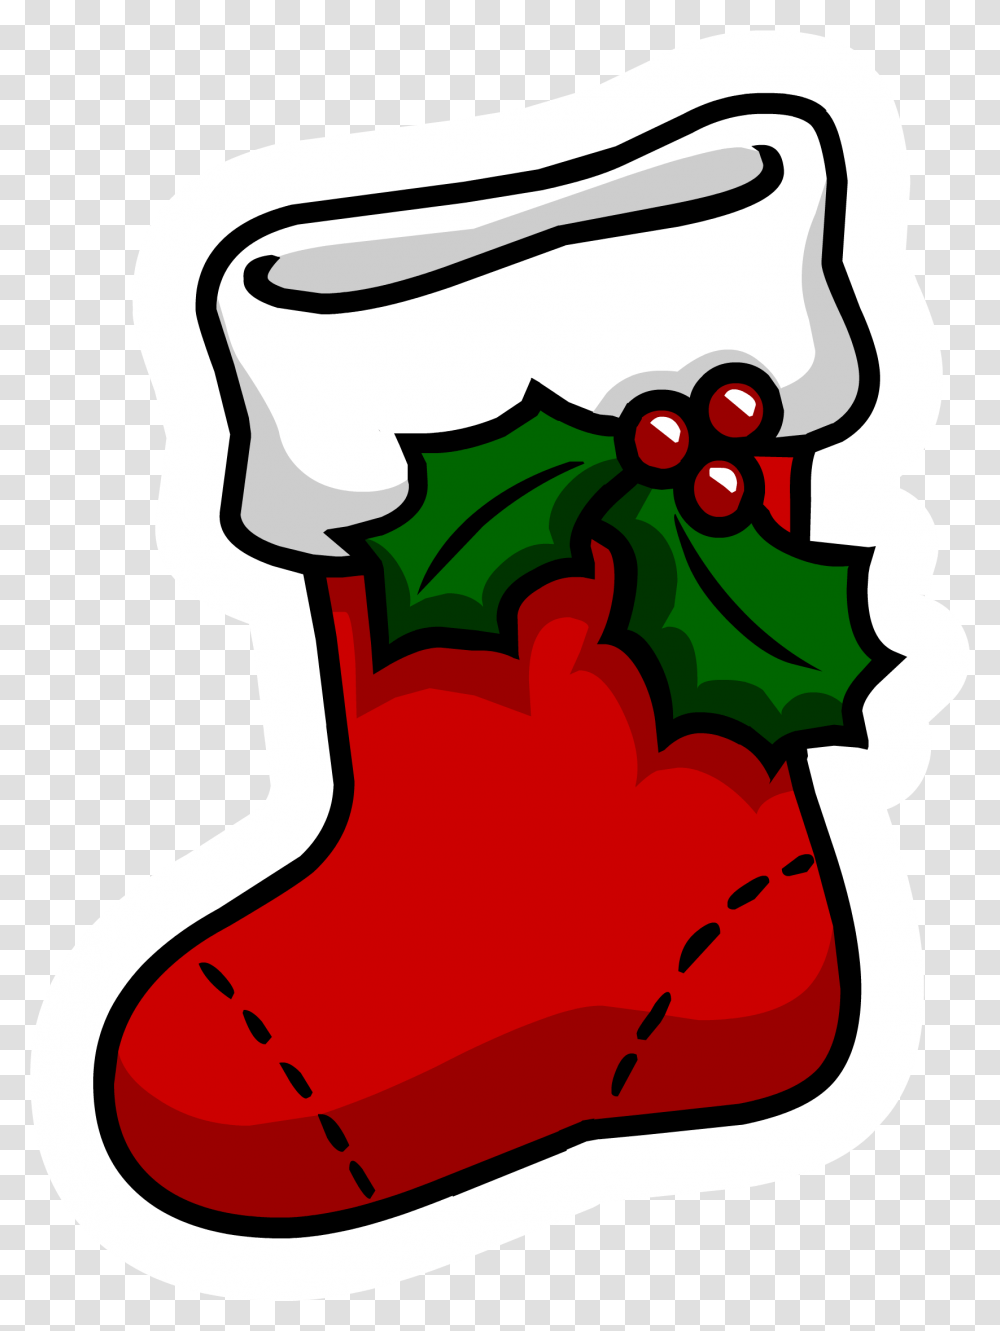 Happy Holidays Background Christmas Stocking, Gift Transparent Png